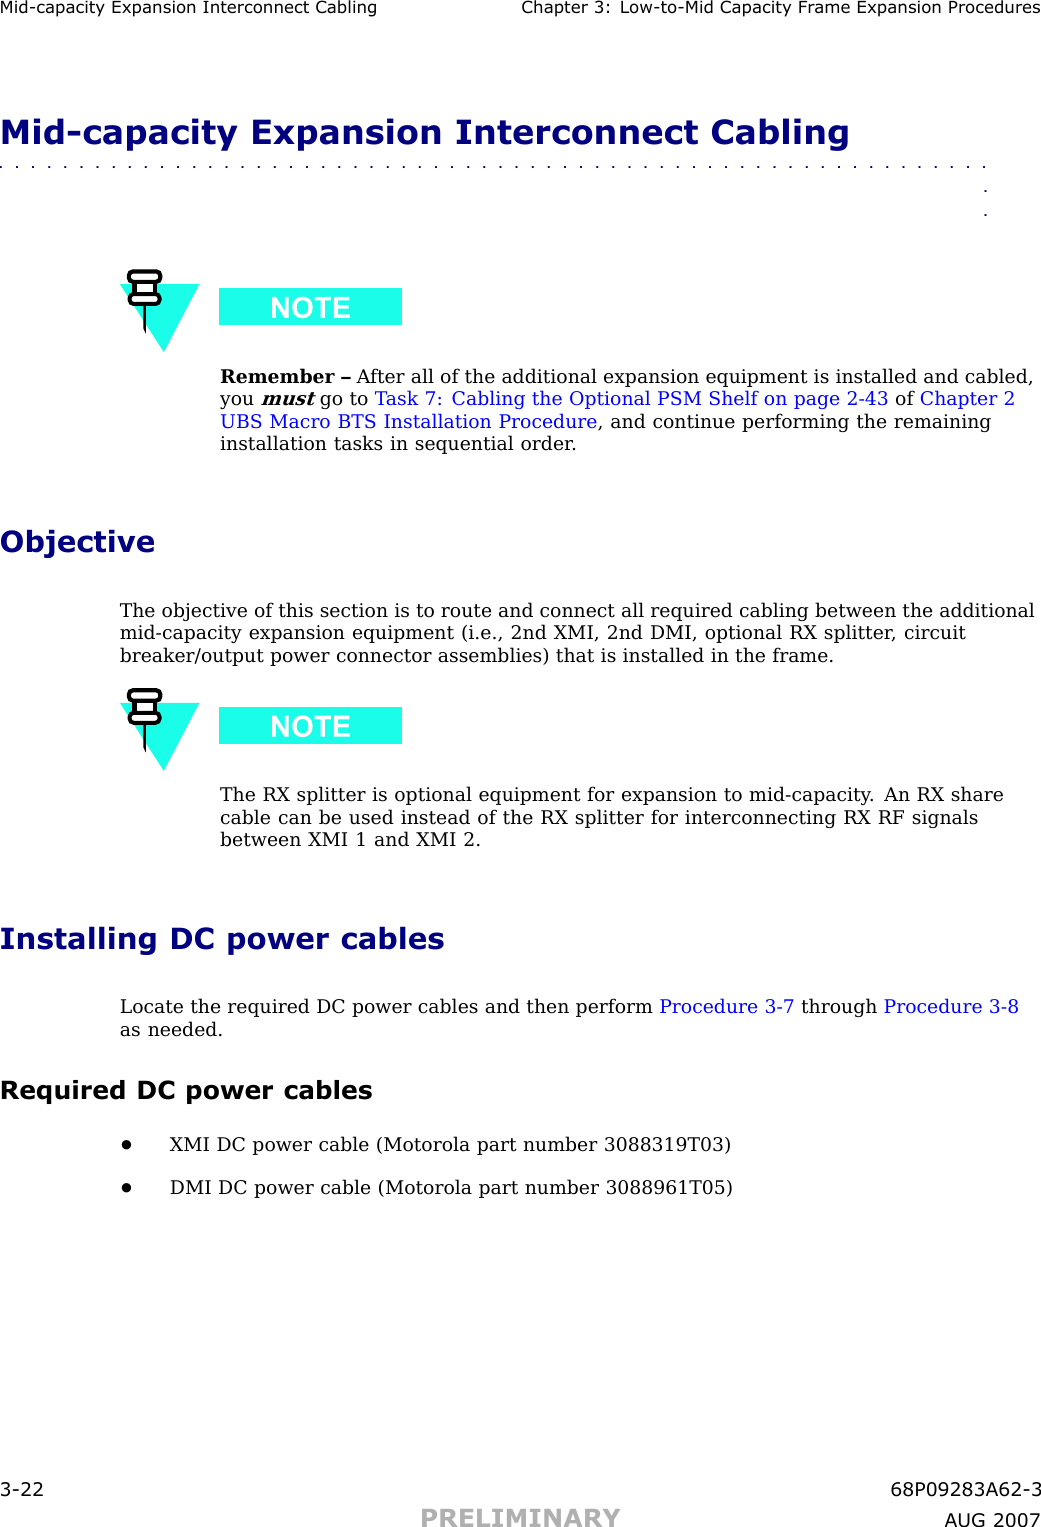 Mid -capacit y Expansion Interconnect Cabling Chapter 3: Low -to -Mid Capacit y Fr ame Expansion ProceduresMid -capacity Expansion Interconnect Cabling■■■■■■■■■■■■■■■■■■■■■■■■■■■■■■■■■■■■■■■■■■■■■■■■■■■■■■■■■■■■■■■■Remember – A fter all of the additional expansion equipment is installed and cabled,youmustgo to T ask 7: Cabling the Optional PSM Shelf on page 2 - 43 of Chapter 2UBS Macro BTS Installation Procedure , and continue performing the remaininginstallation tasks in sequential order .ObjectiveThe objective of this section is to route and connect all required cabling between the additionalmid -capacity expansion equipment (i.e., 2nd XMI, 2nd DMI, optional RX splitter , circuitbreaker/output power connector assemblies) that is installed in the frame.The RX splitter is optional equipment for expansion to mid -capacity . An RX sharecable can be used instead of the RX splitter for interconnecting RX RF signalsbetween XMI 1 and XMI 2.Installing DC power cablesLocate the required DC power cables and then perform Procedure 3 -7 through Procedure 3 -8as needed.Required DC power cables•XMI DC power cable (Motorola part number 3088319T03)•DMI DC power cable (Motorola part number 3088961T05)3 -22 68P09283A62 -3PRELIMINARY A UG 2007